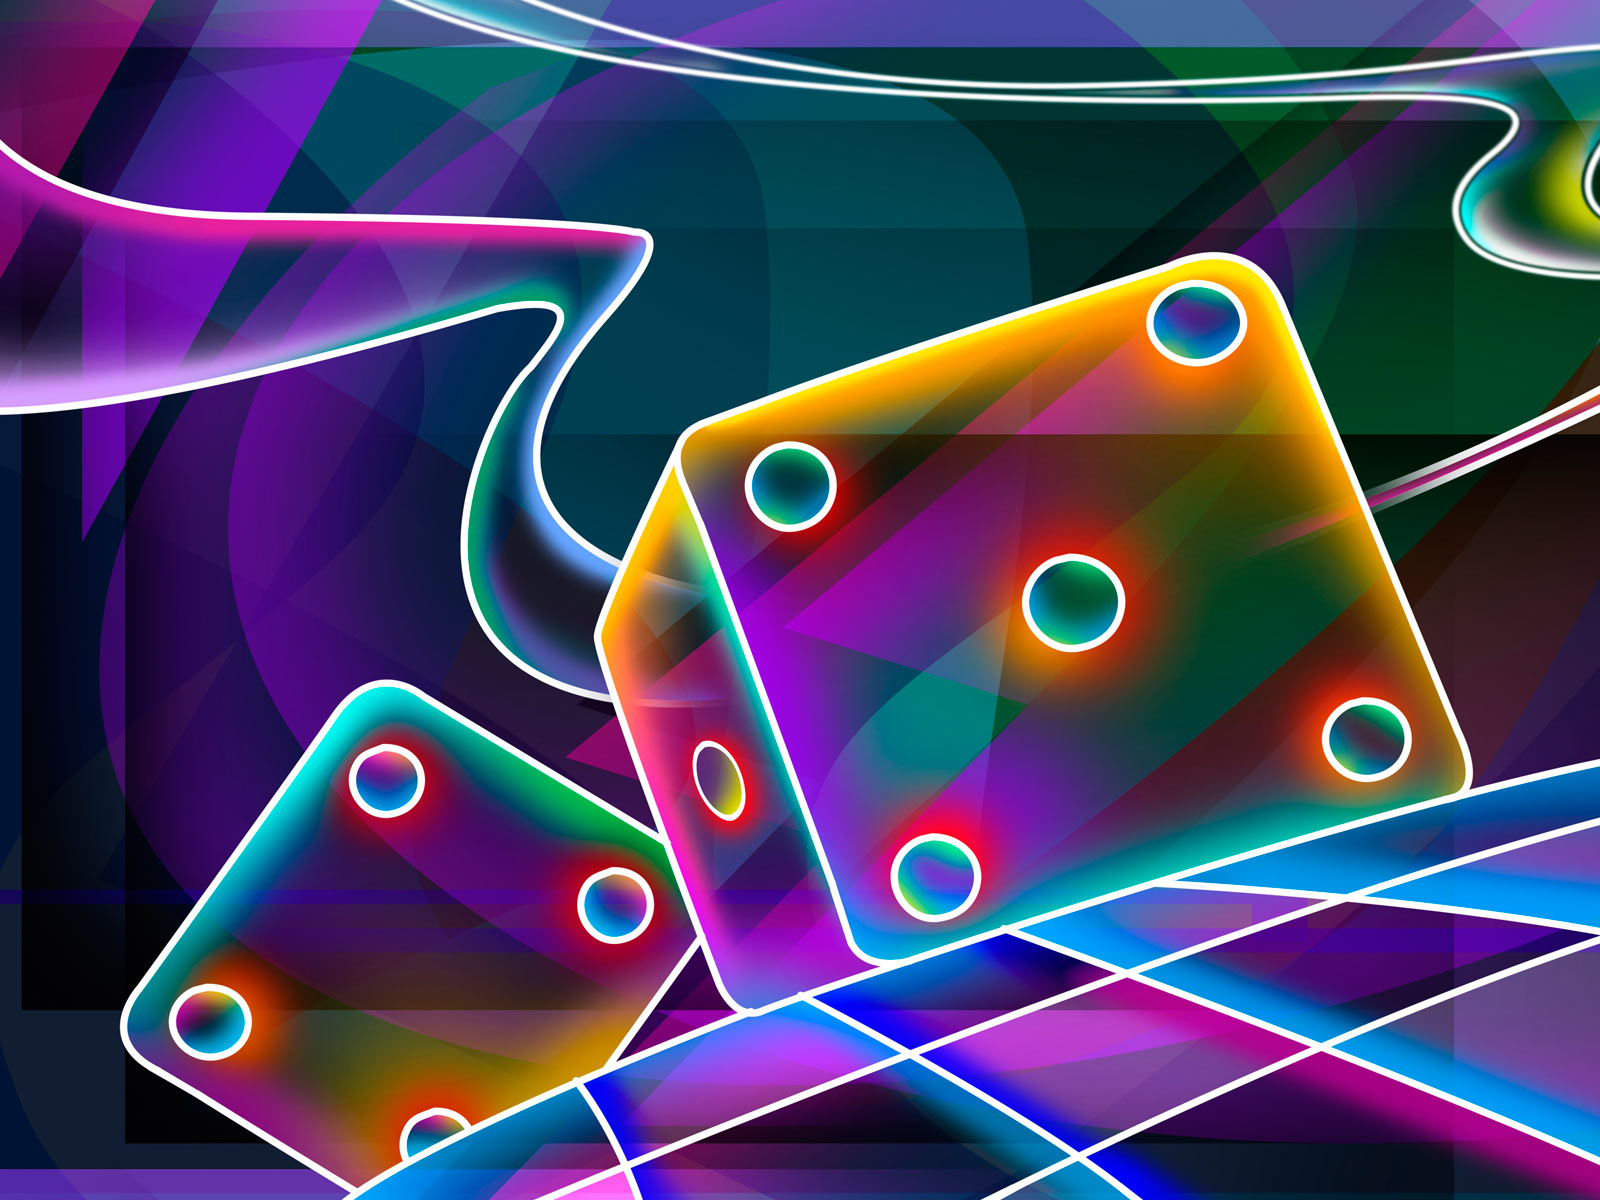 3d abstract 3d wallpapers hd 3d abstract 3d wallpapers hd